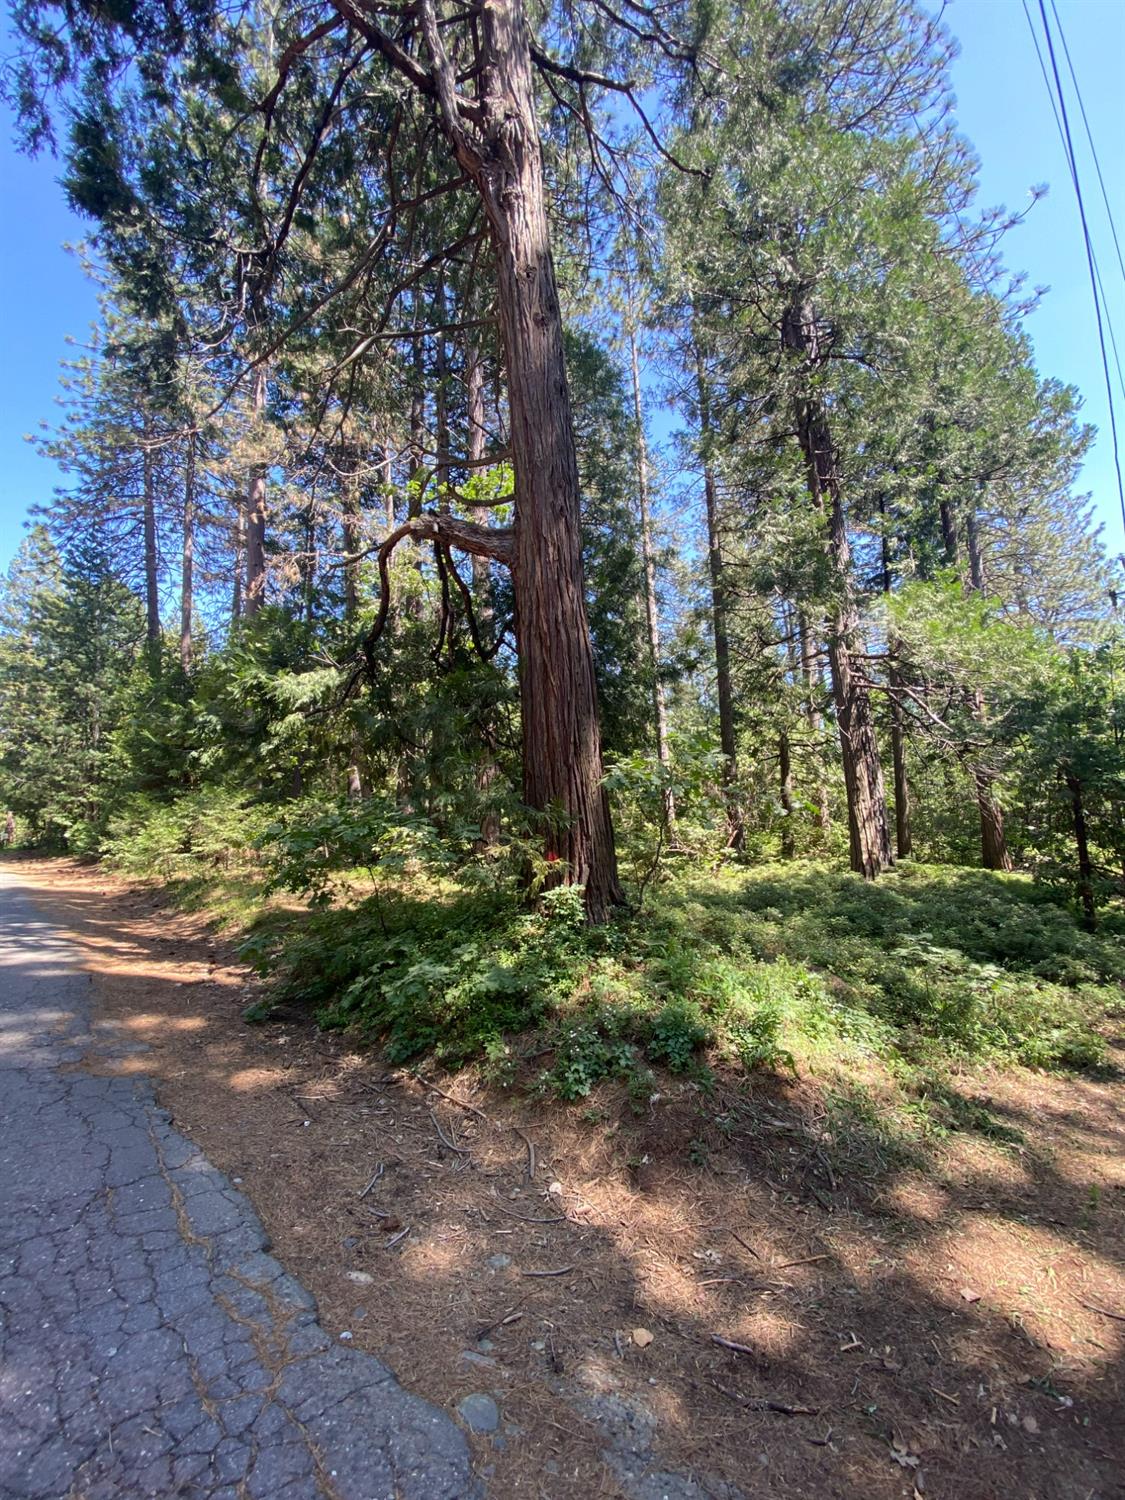 Beautiful level lot in sweet Camino. If you're looking to build your next home or an investment property this, is it. Water and power are needed but both are close, and septic is required as well. This lot is in an area of cute homes and a quaint neighborhood.  Easy access from Highway 50 and only minutes to Placerville. Close to Sly Park Lake, hiking, biking and fishing and an hour to South Lake Tahoe.